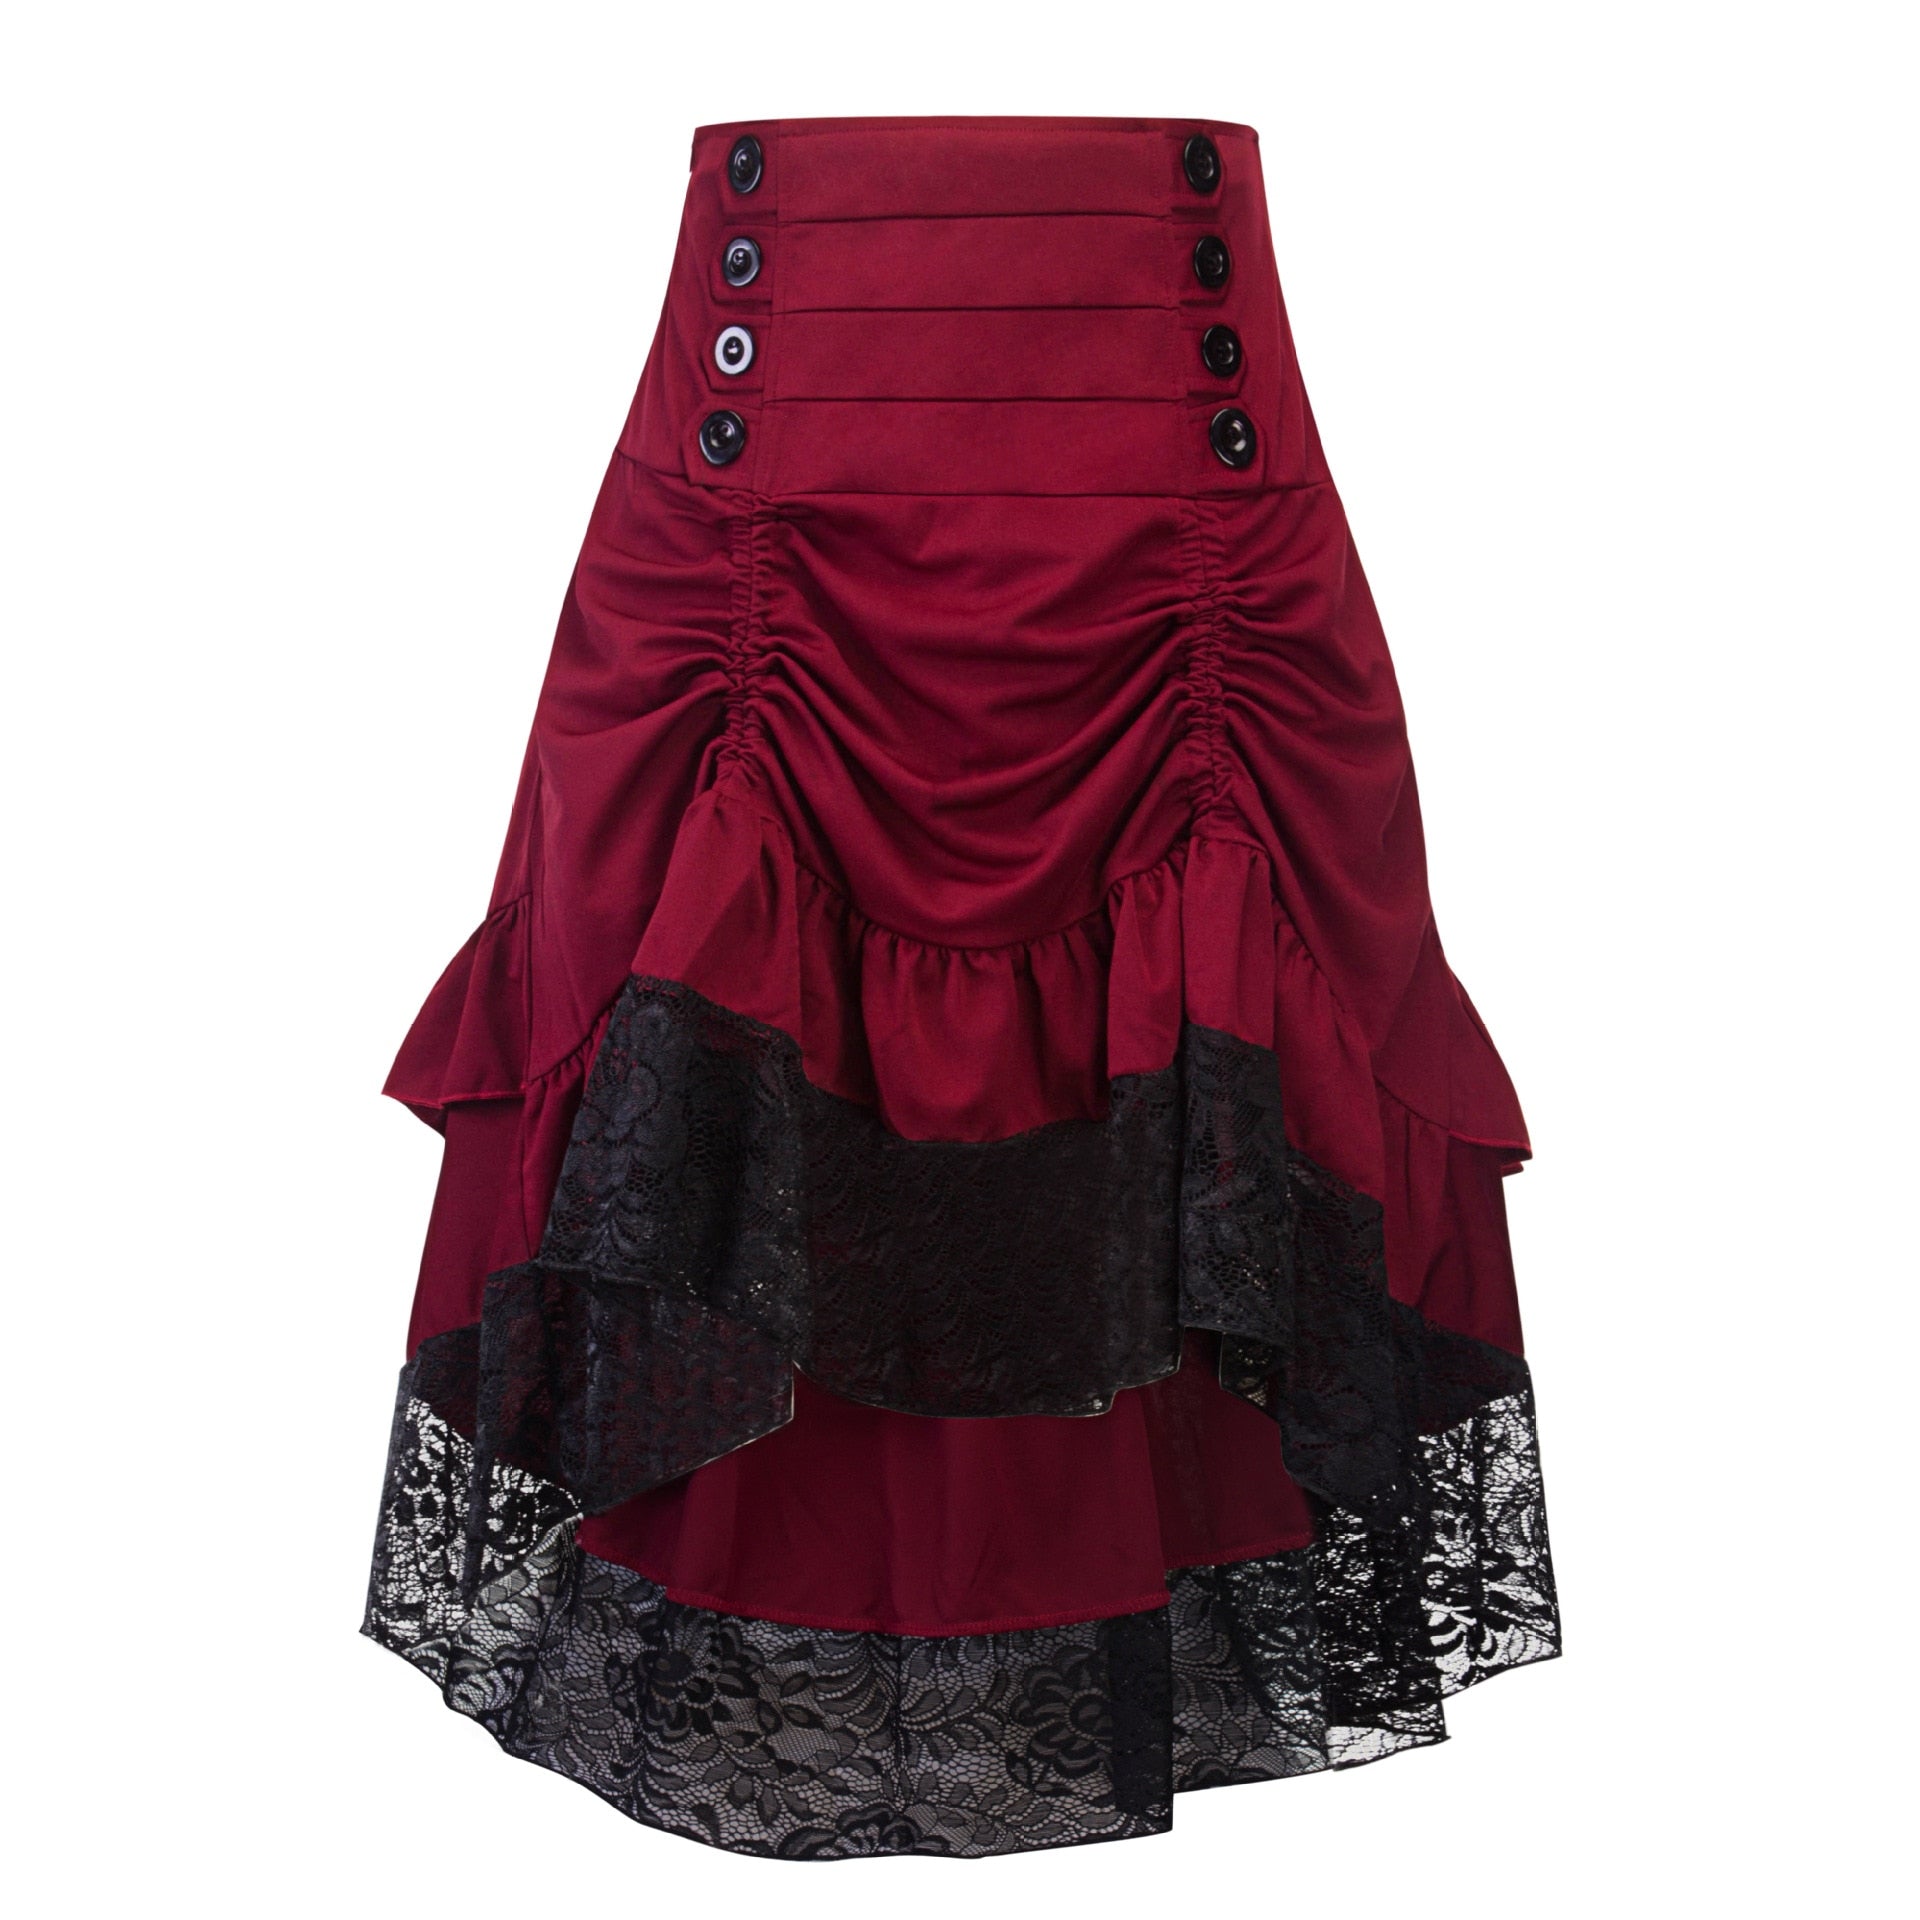 2020 S-2XL  Autumn And Winter new style Women's steampunk clothing party club wear black lace hip skirt